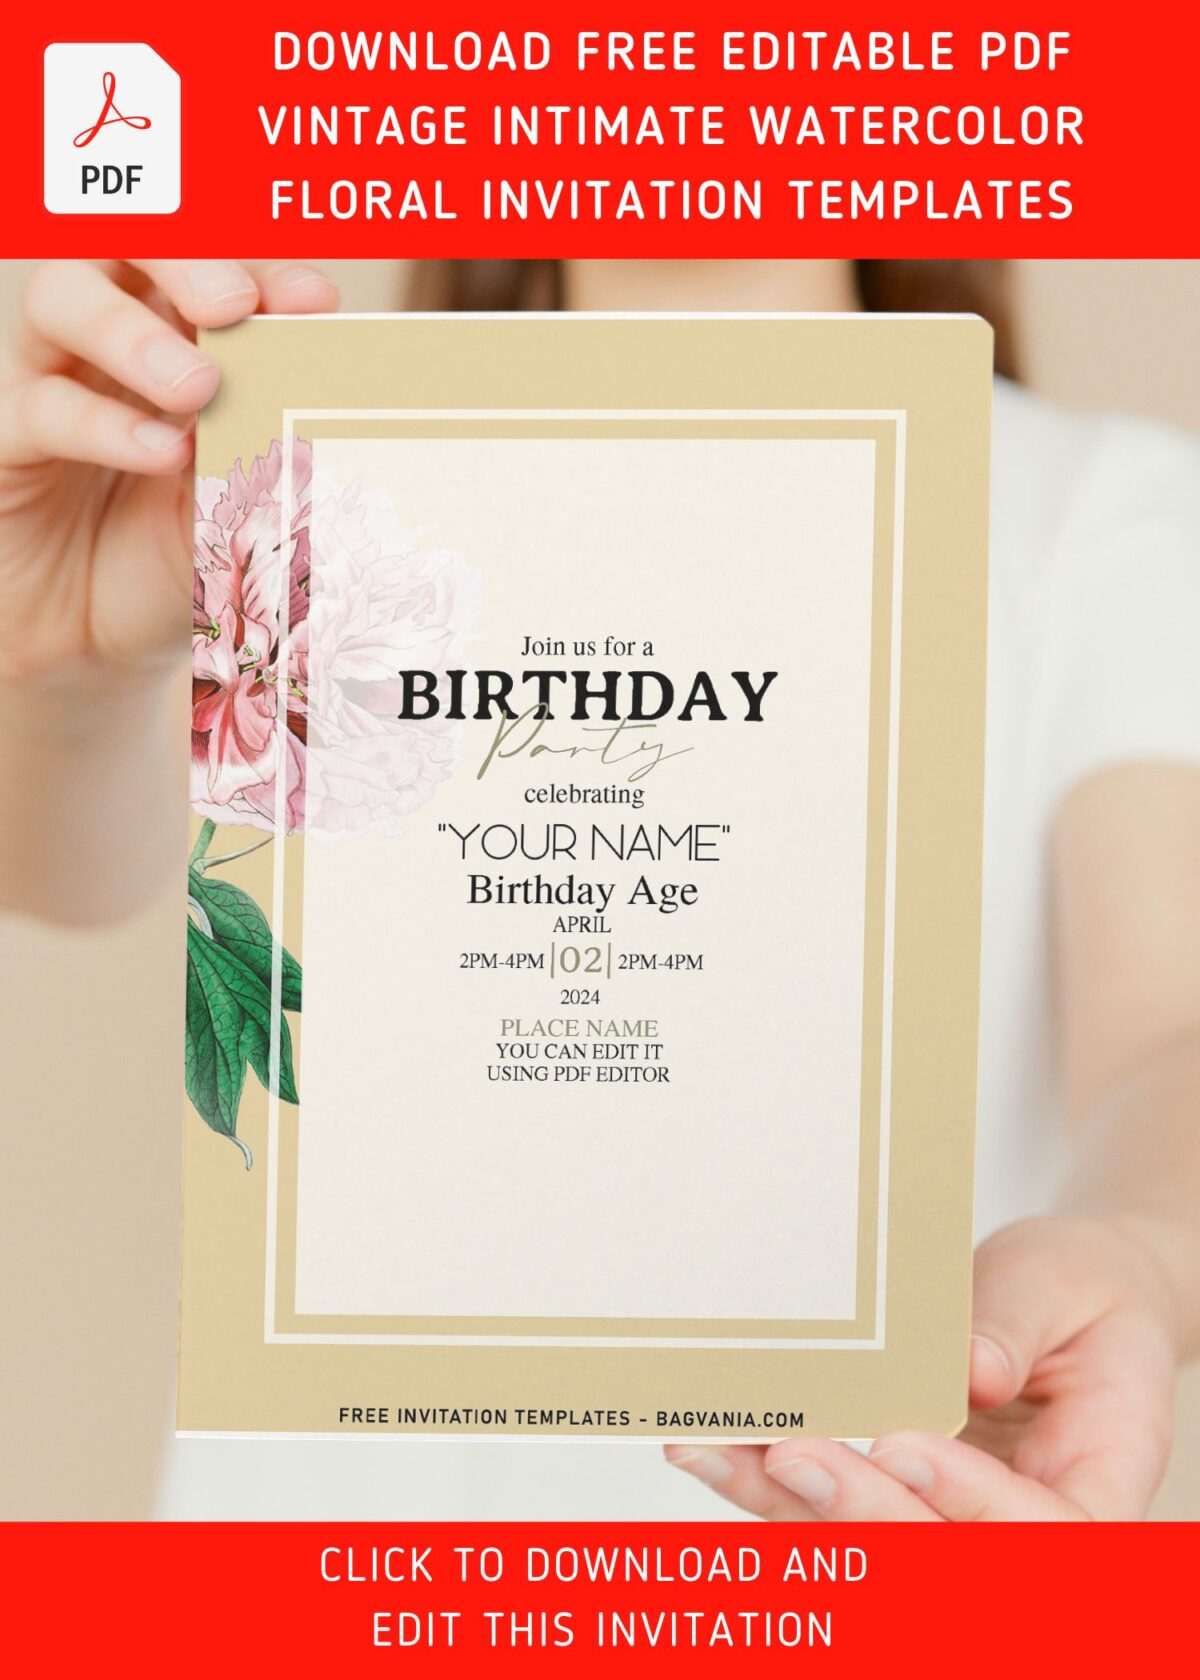 (Free Editable PDF) Intimate Blush Paper Blooms Birthday Invitation Templates with blush pink watercolor ranunculus